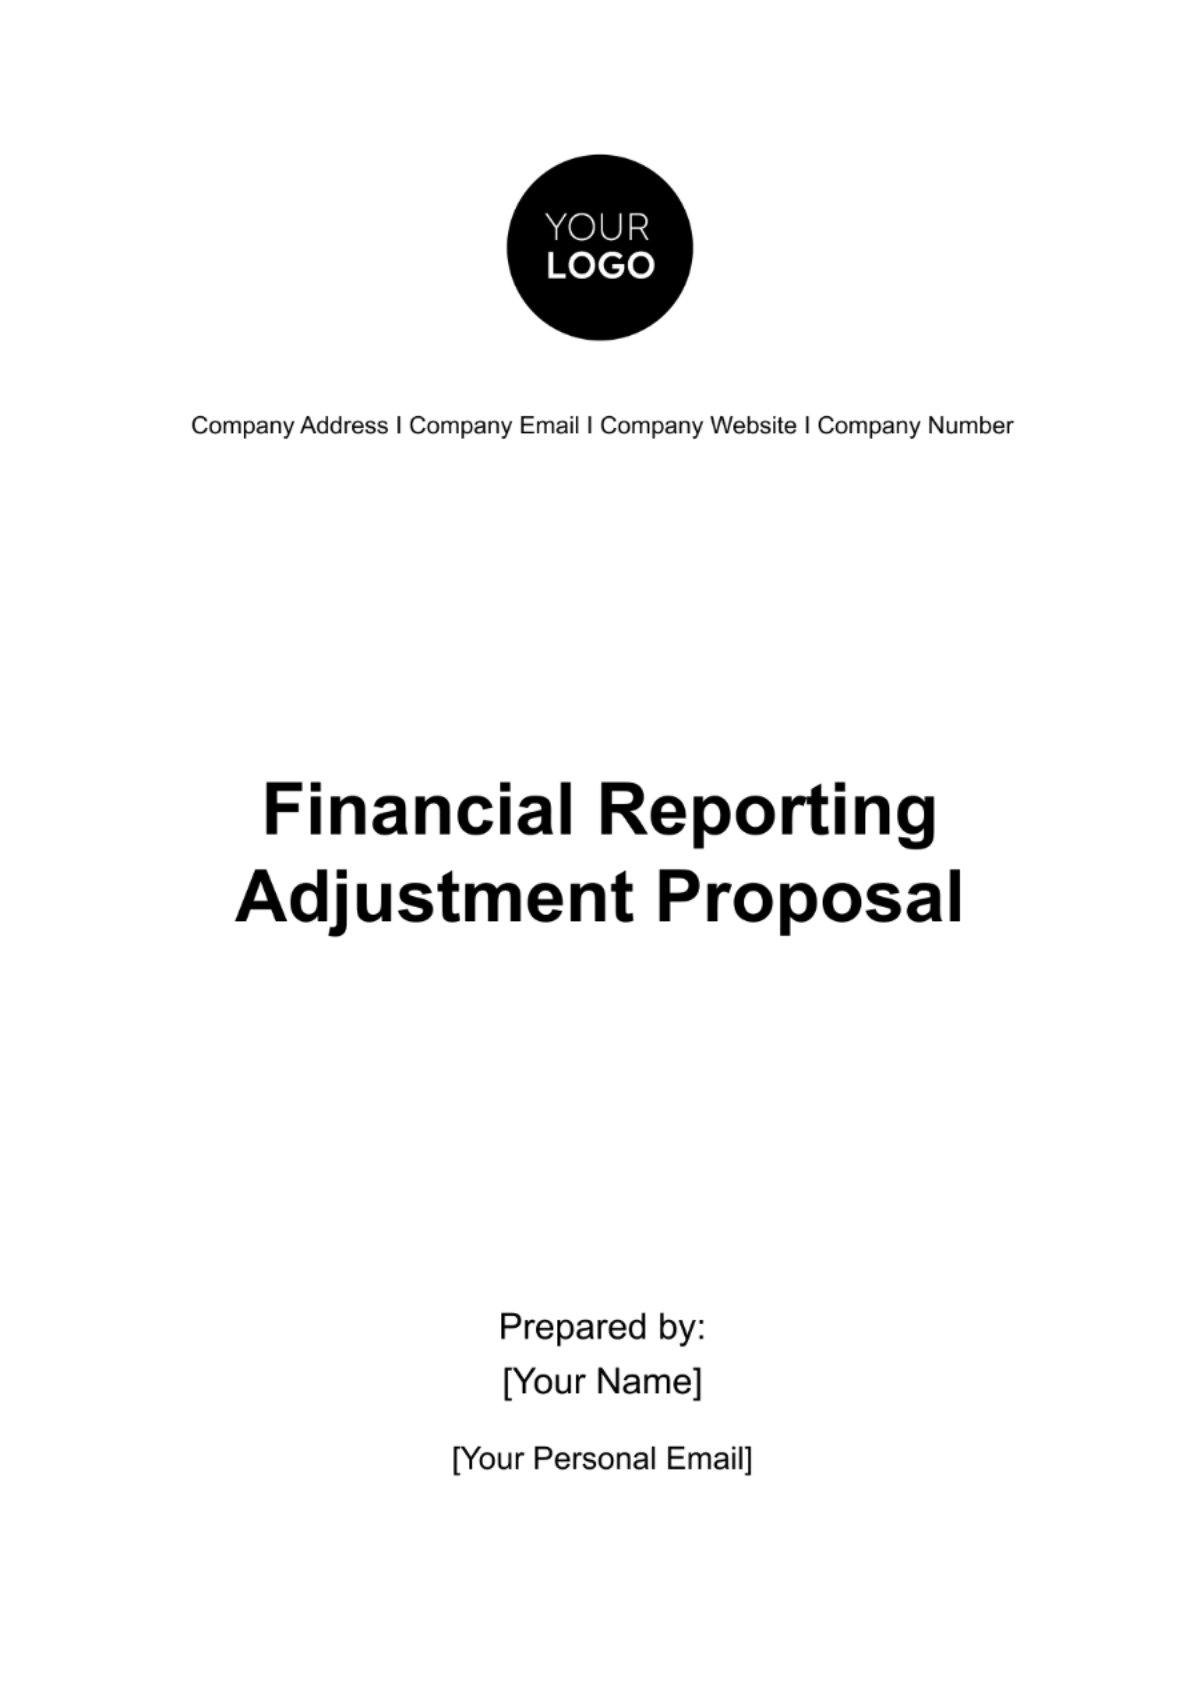 Financial Reporting Adjustment Proposal Template